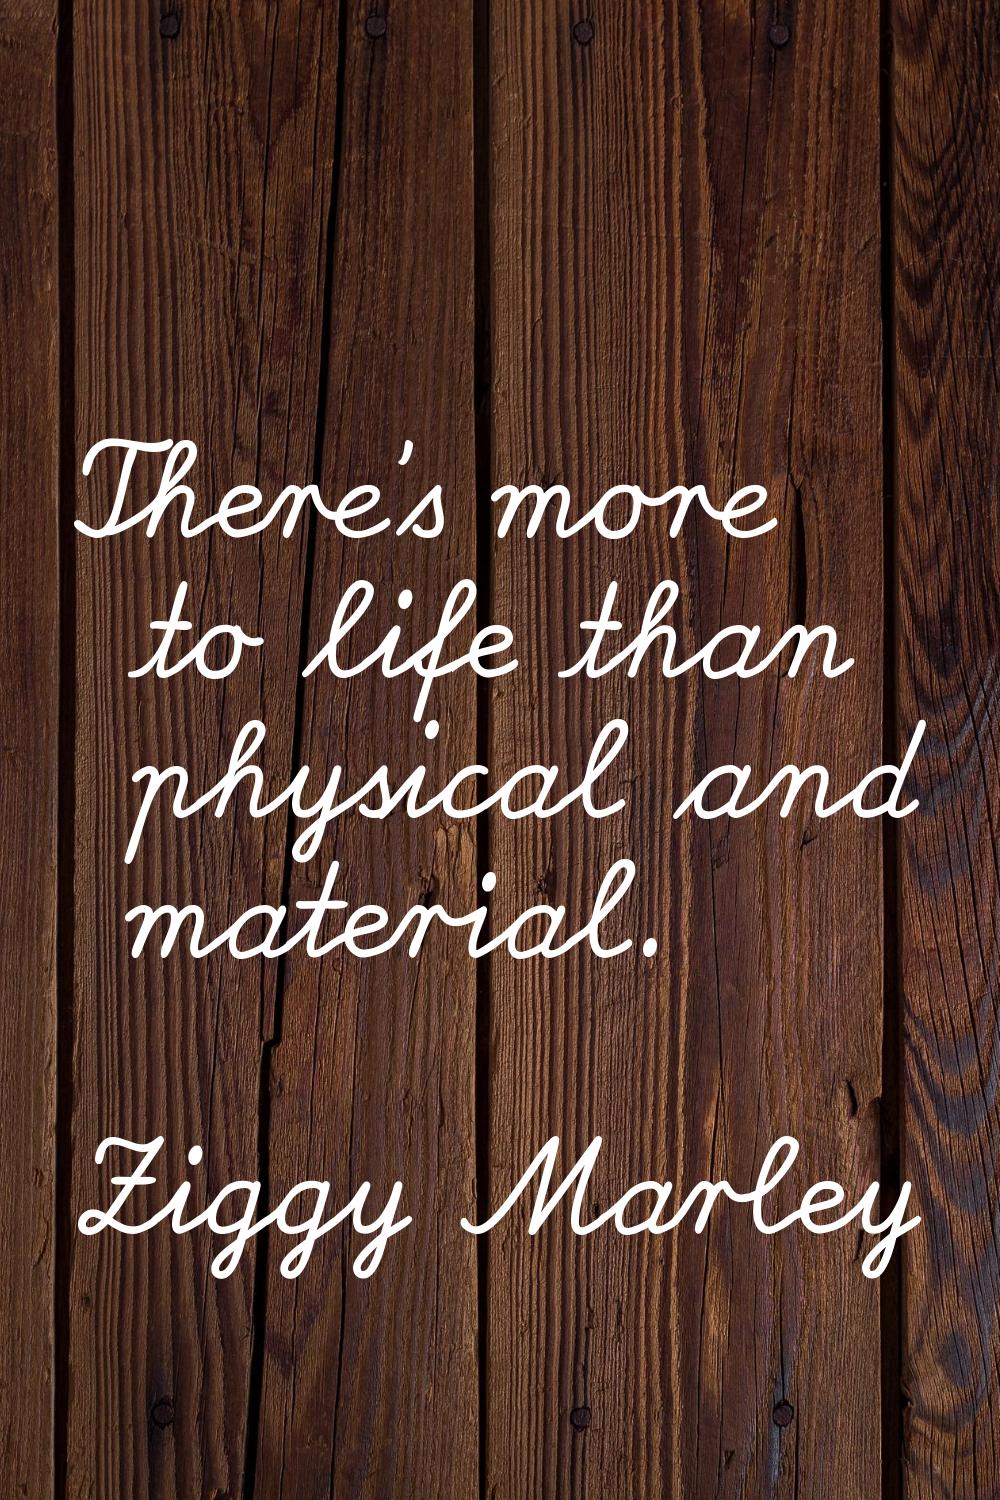 There's more to life than physical and material.